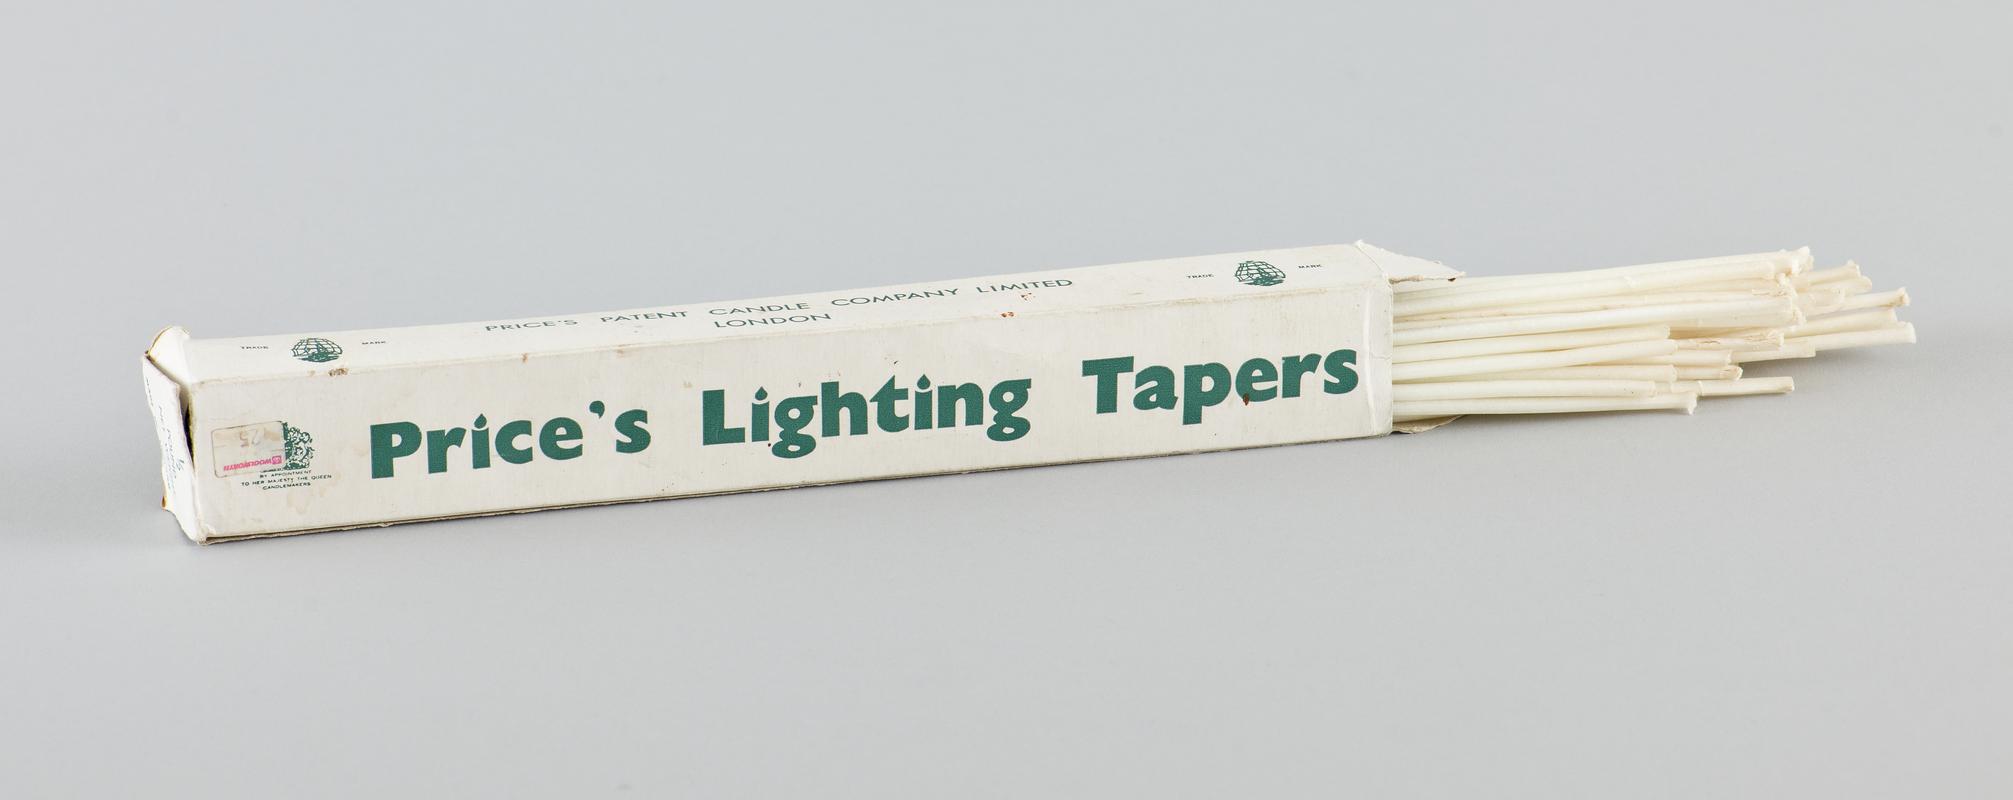 Half pound box of 'Prices' wax lighting tapers in original card box. White card with green printed branding, well worn with flap missing from one end. Some of the wax tapers have been removed from box, which is about 75% full.